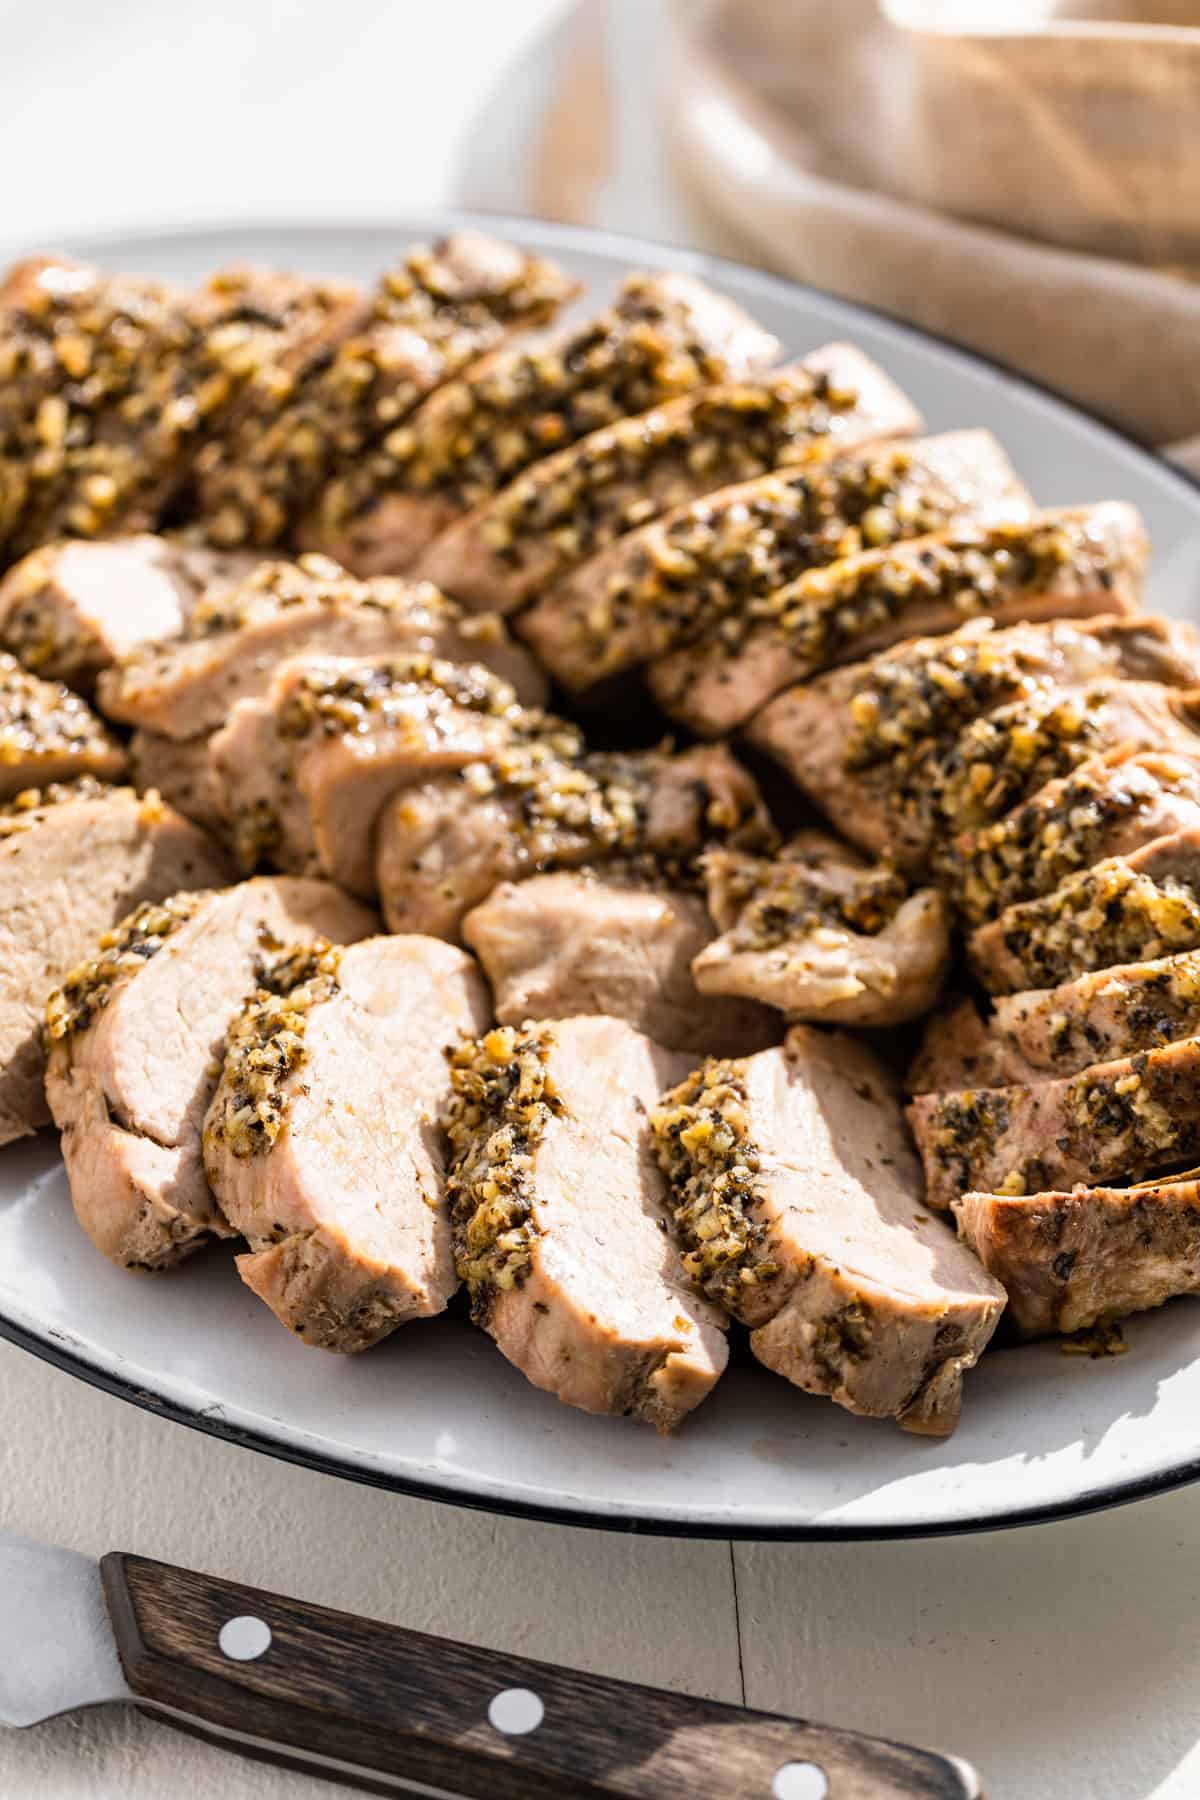 Side view of sliced Pork Tenderloin laid in a circle on a platter with a wood handled knife in the front.